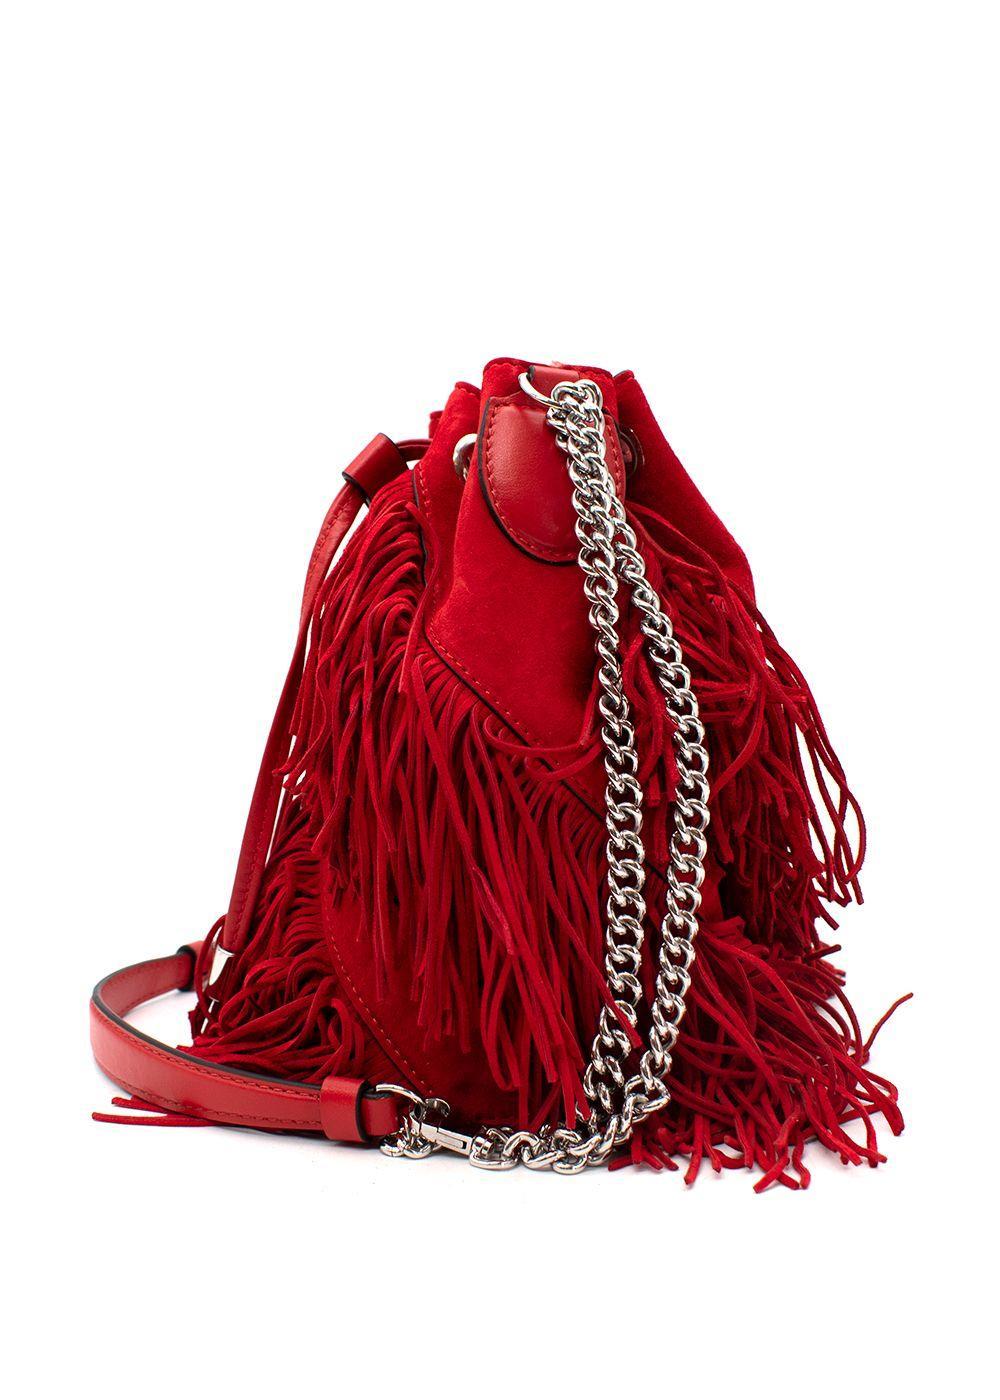 Brown Christian Louboutin Red Suede Marie Jane Fringed Bucket Bag For Sale